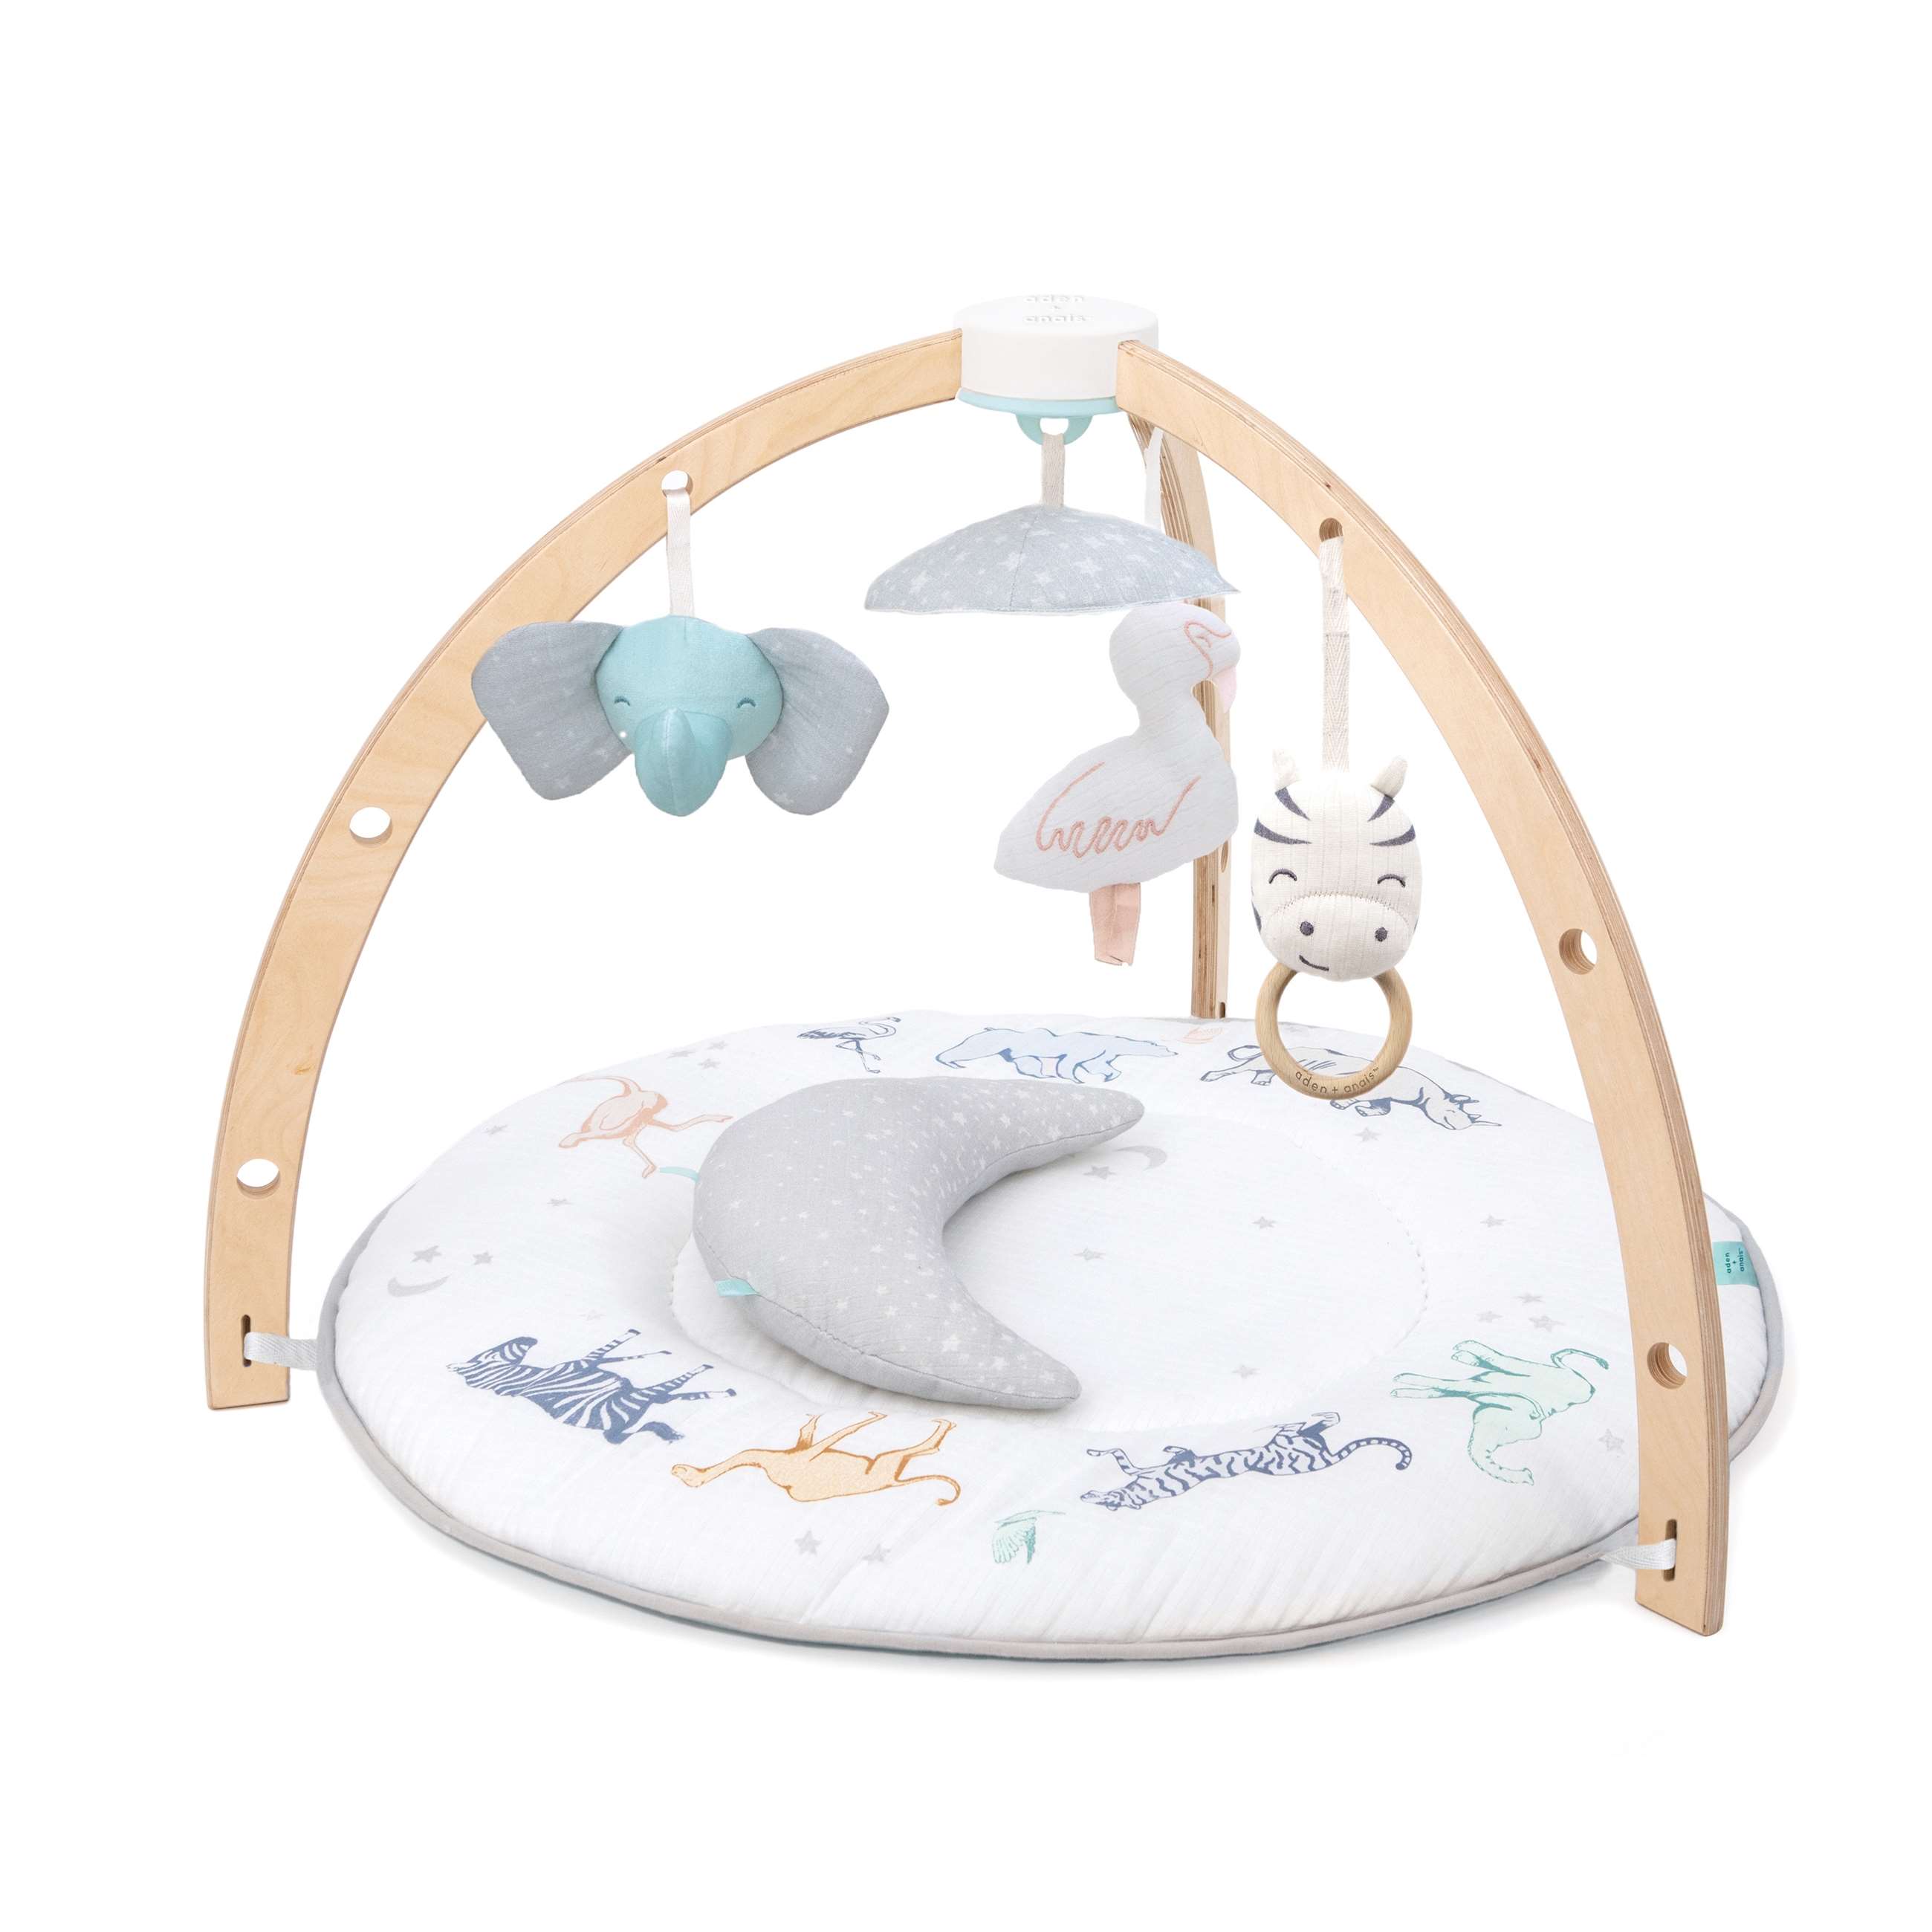 aagm10001_1-baby-playtime-activity-gym